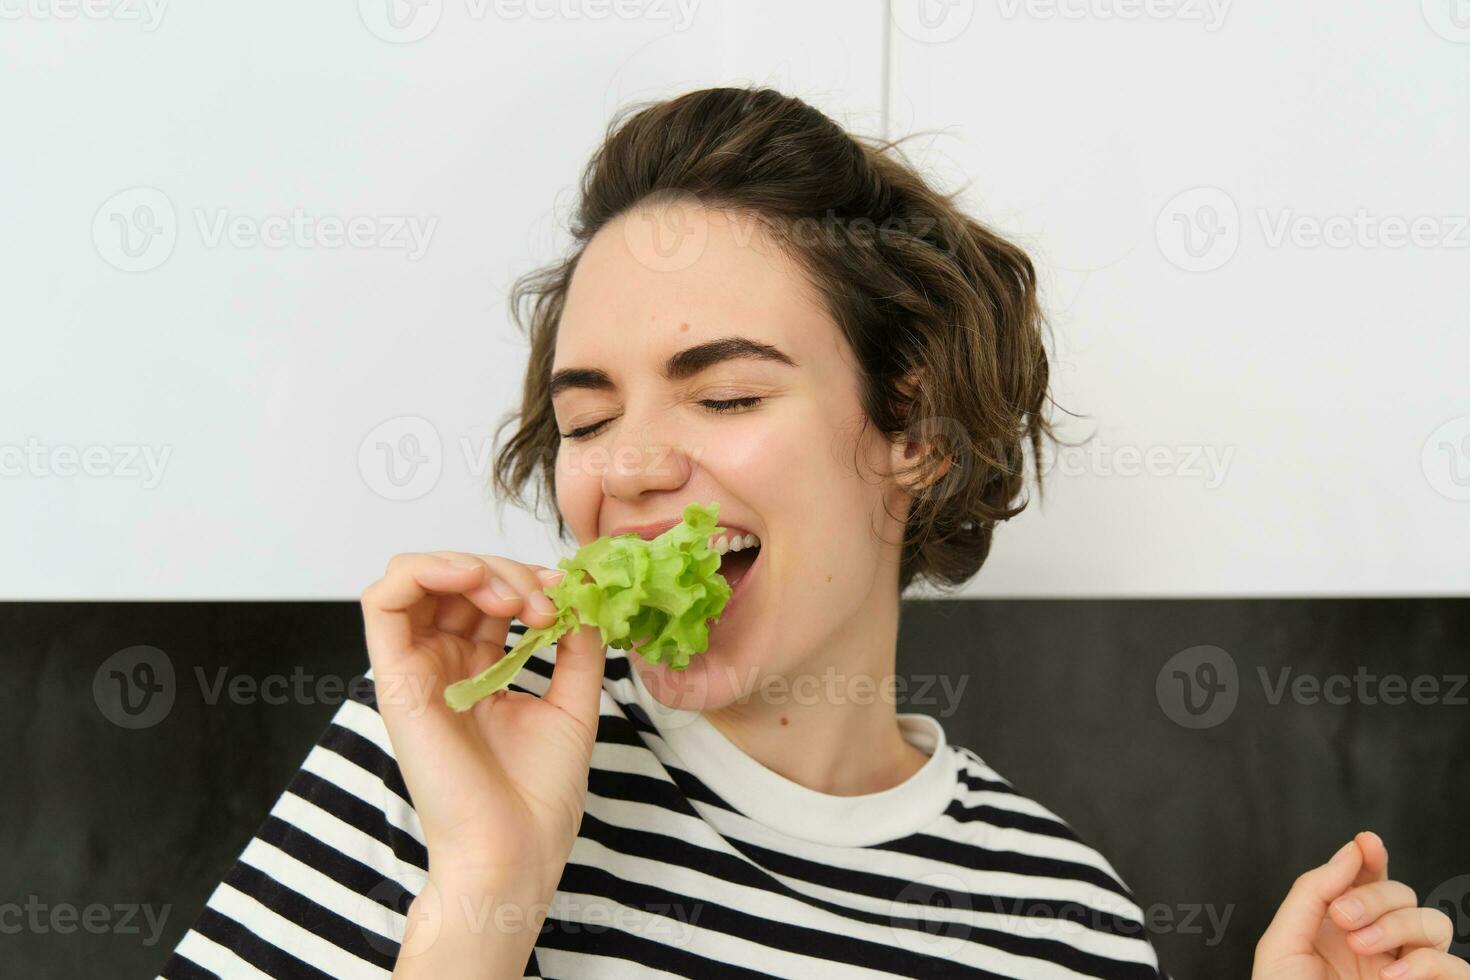 Close up of funny cute woman, vegetarian eating lettuce leaf and smiling, concept of healthy diet, girl likes vegetables, standing in the kitchen photo